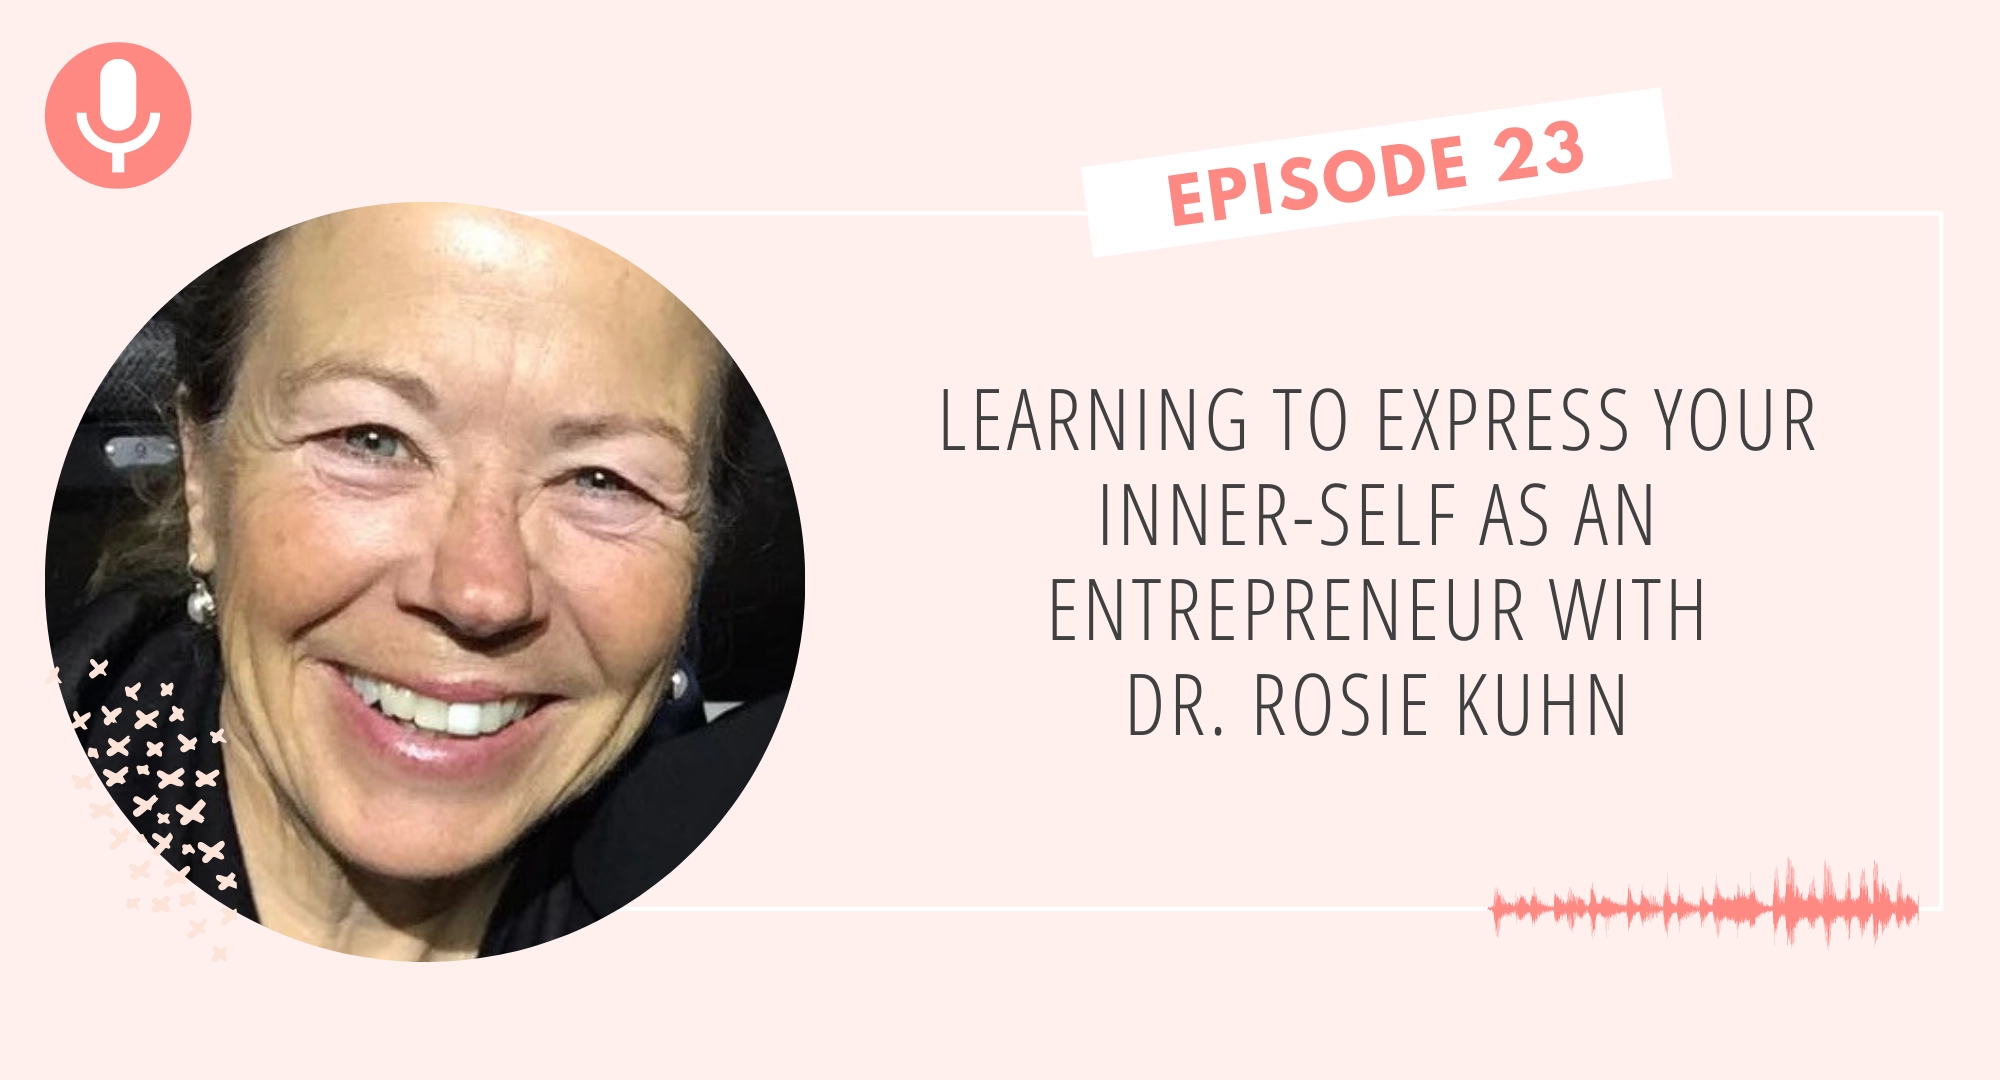 Learning to Express Your Inner-Self as an Entrepreneur with Dr. Rosie Kuhn